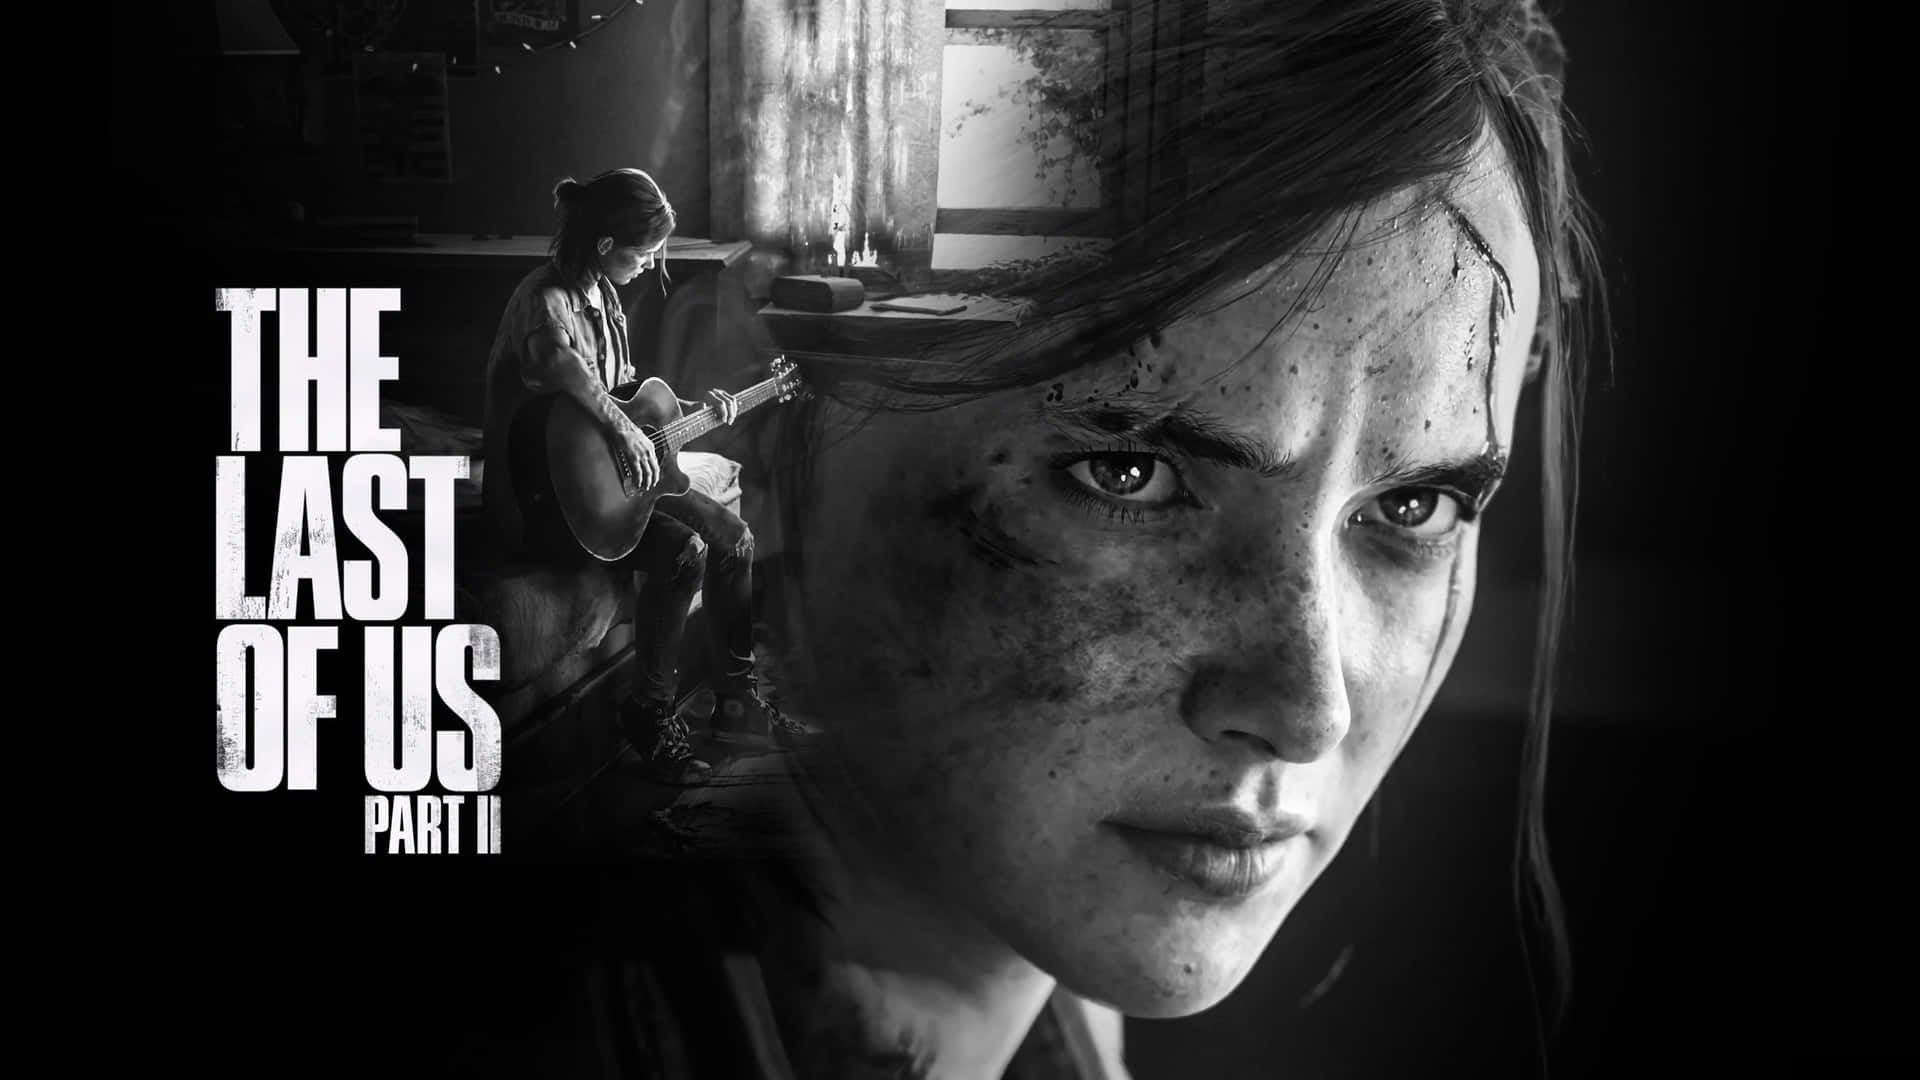 a high quality Ellie wallpaper (part 2)for your phone : r/thelastofus